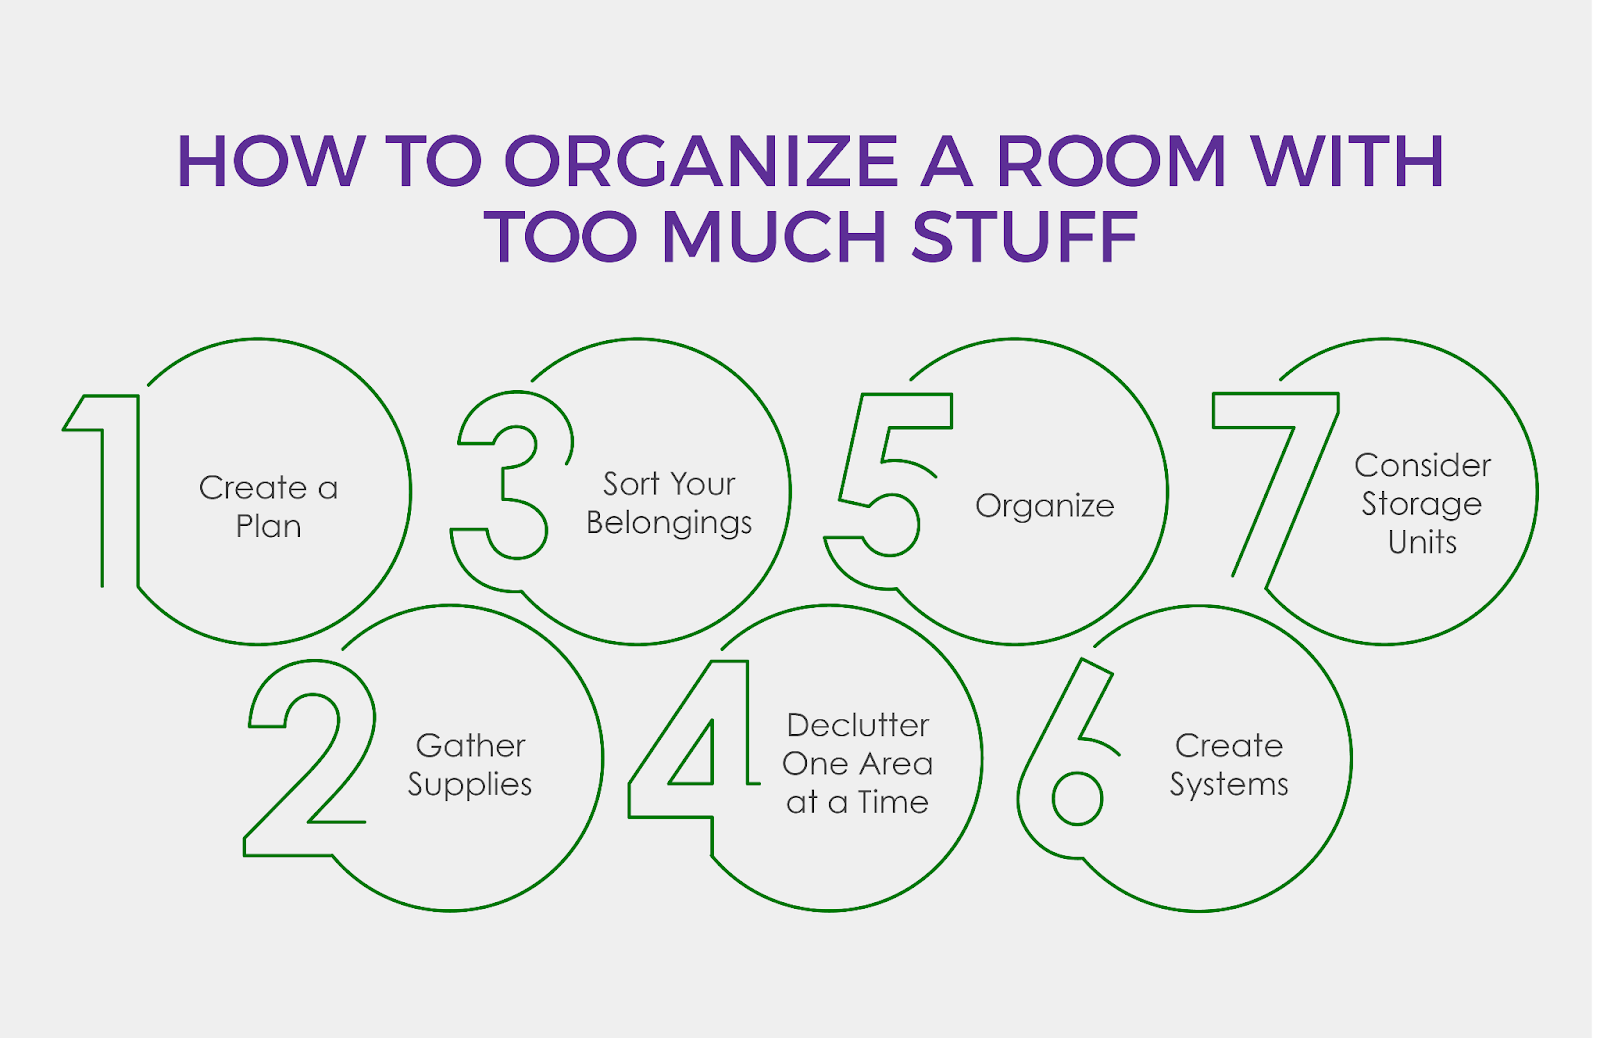 Steps on how to organize a room with too much stuff